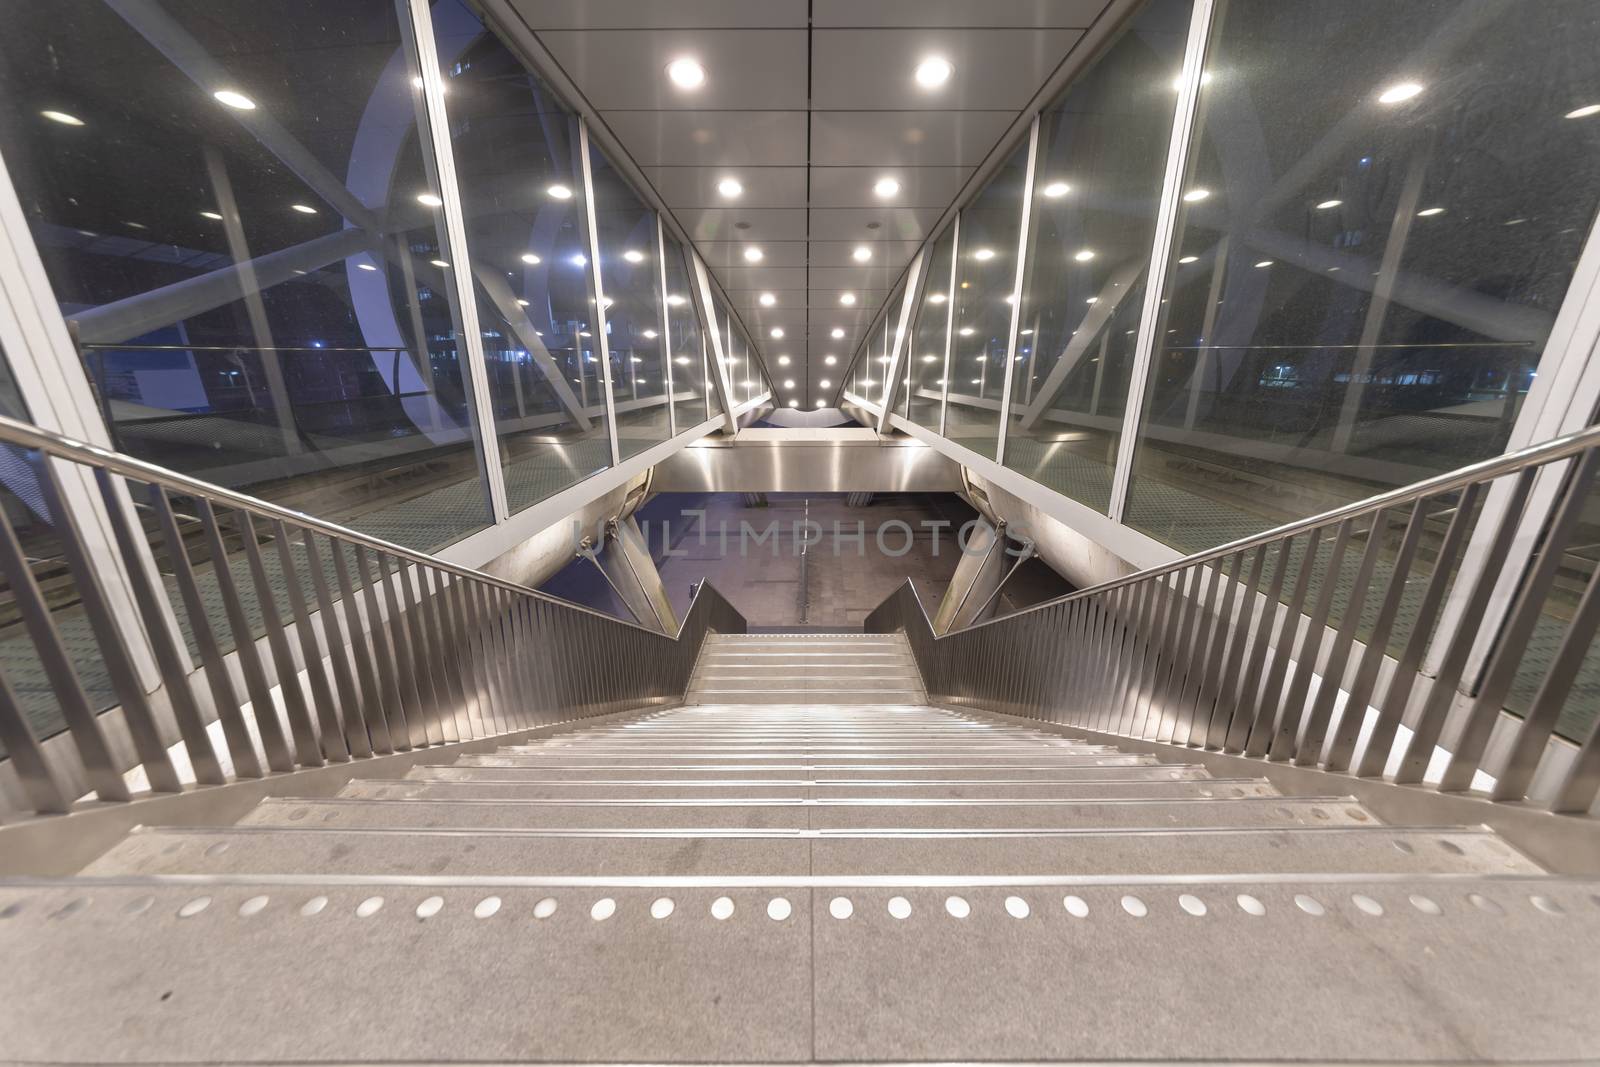 Beatrixkwartier (Beatrix district in Dutch) entrance East escalator getting out from tramway station in The Hague at night, Netherlands by ankorlight